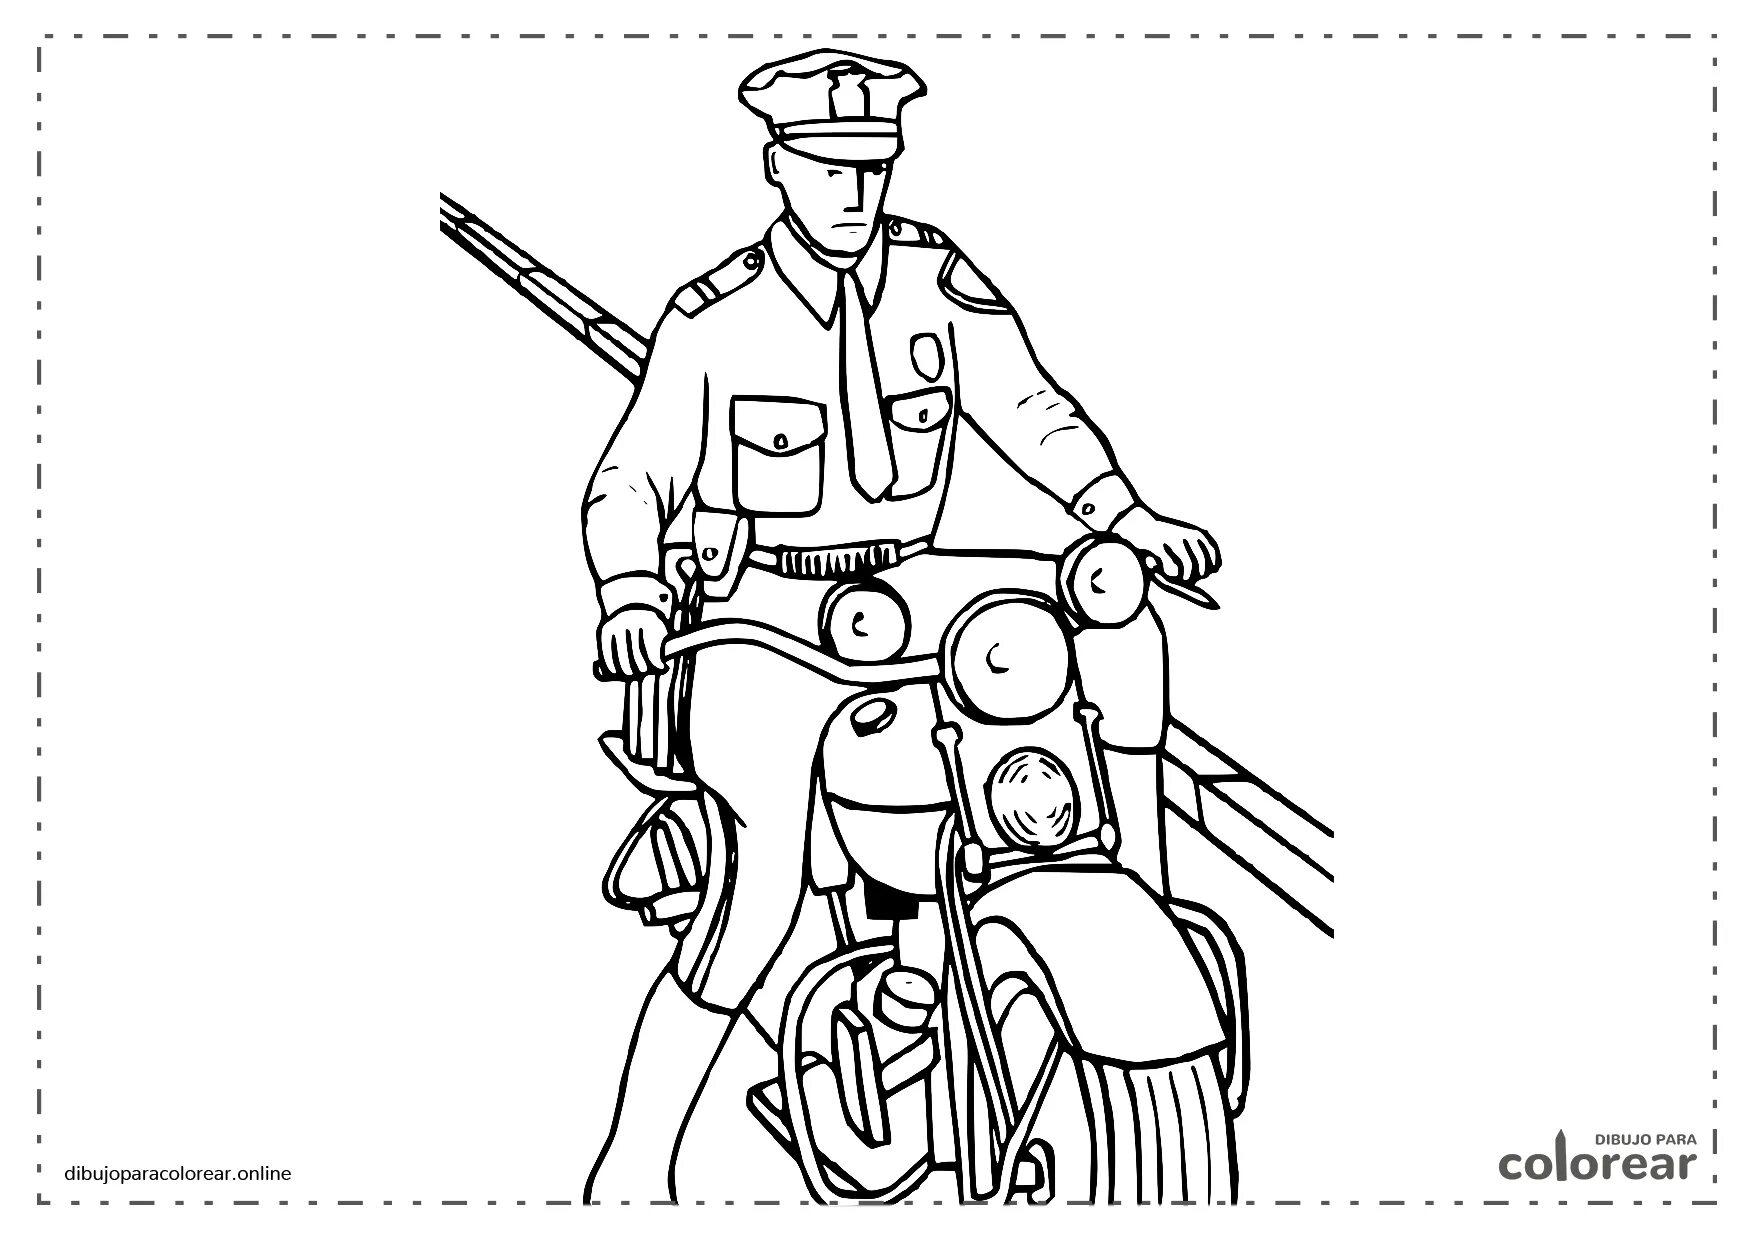 Cute russian police coloring book